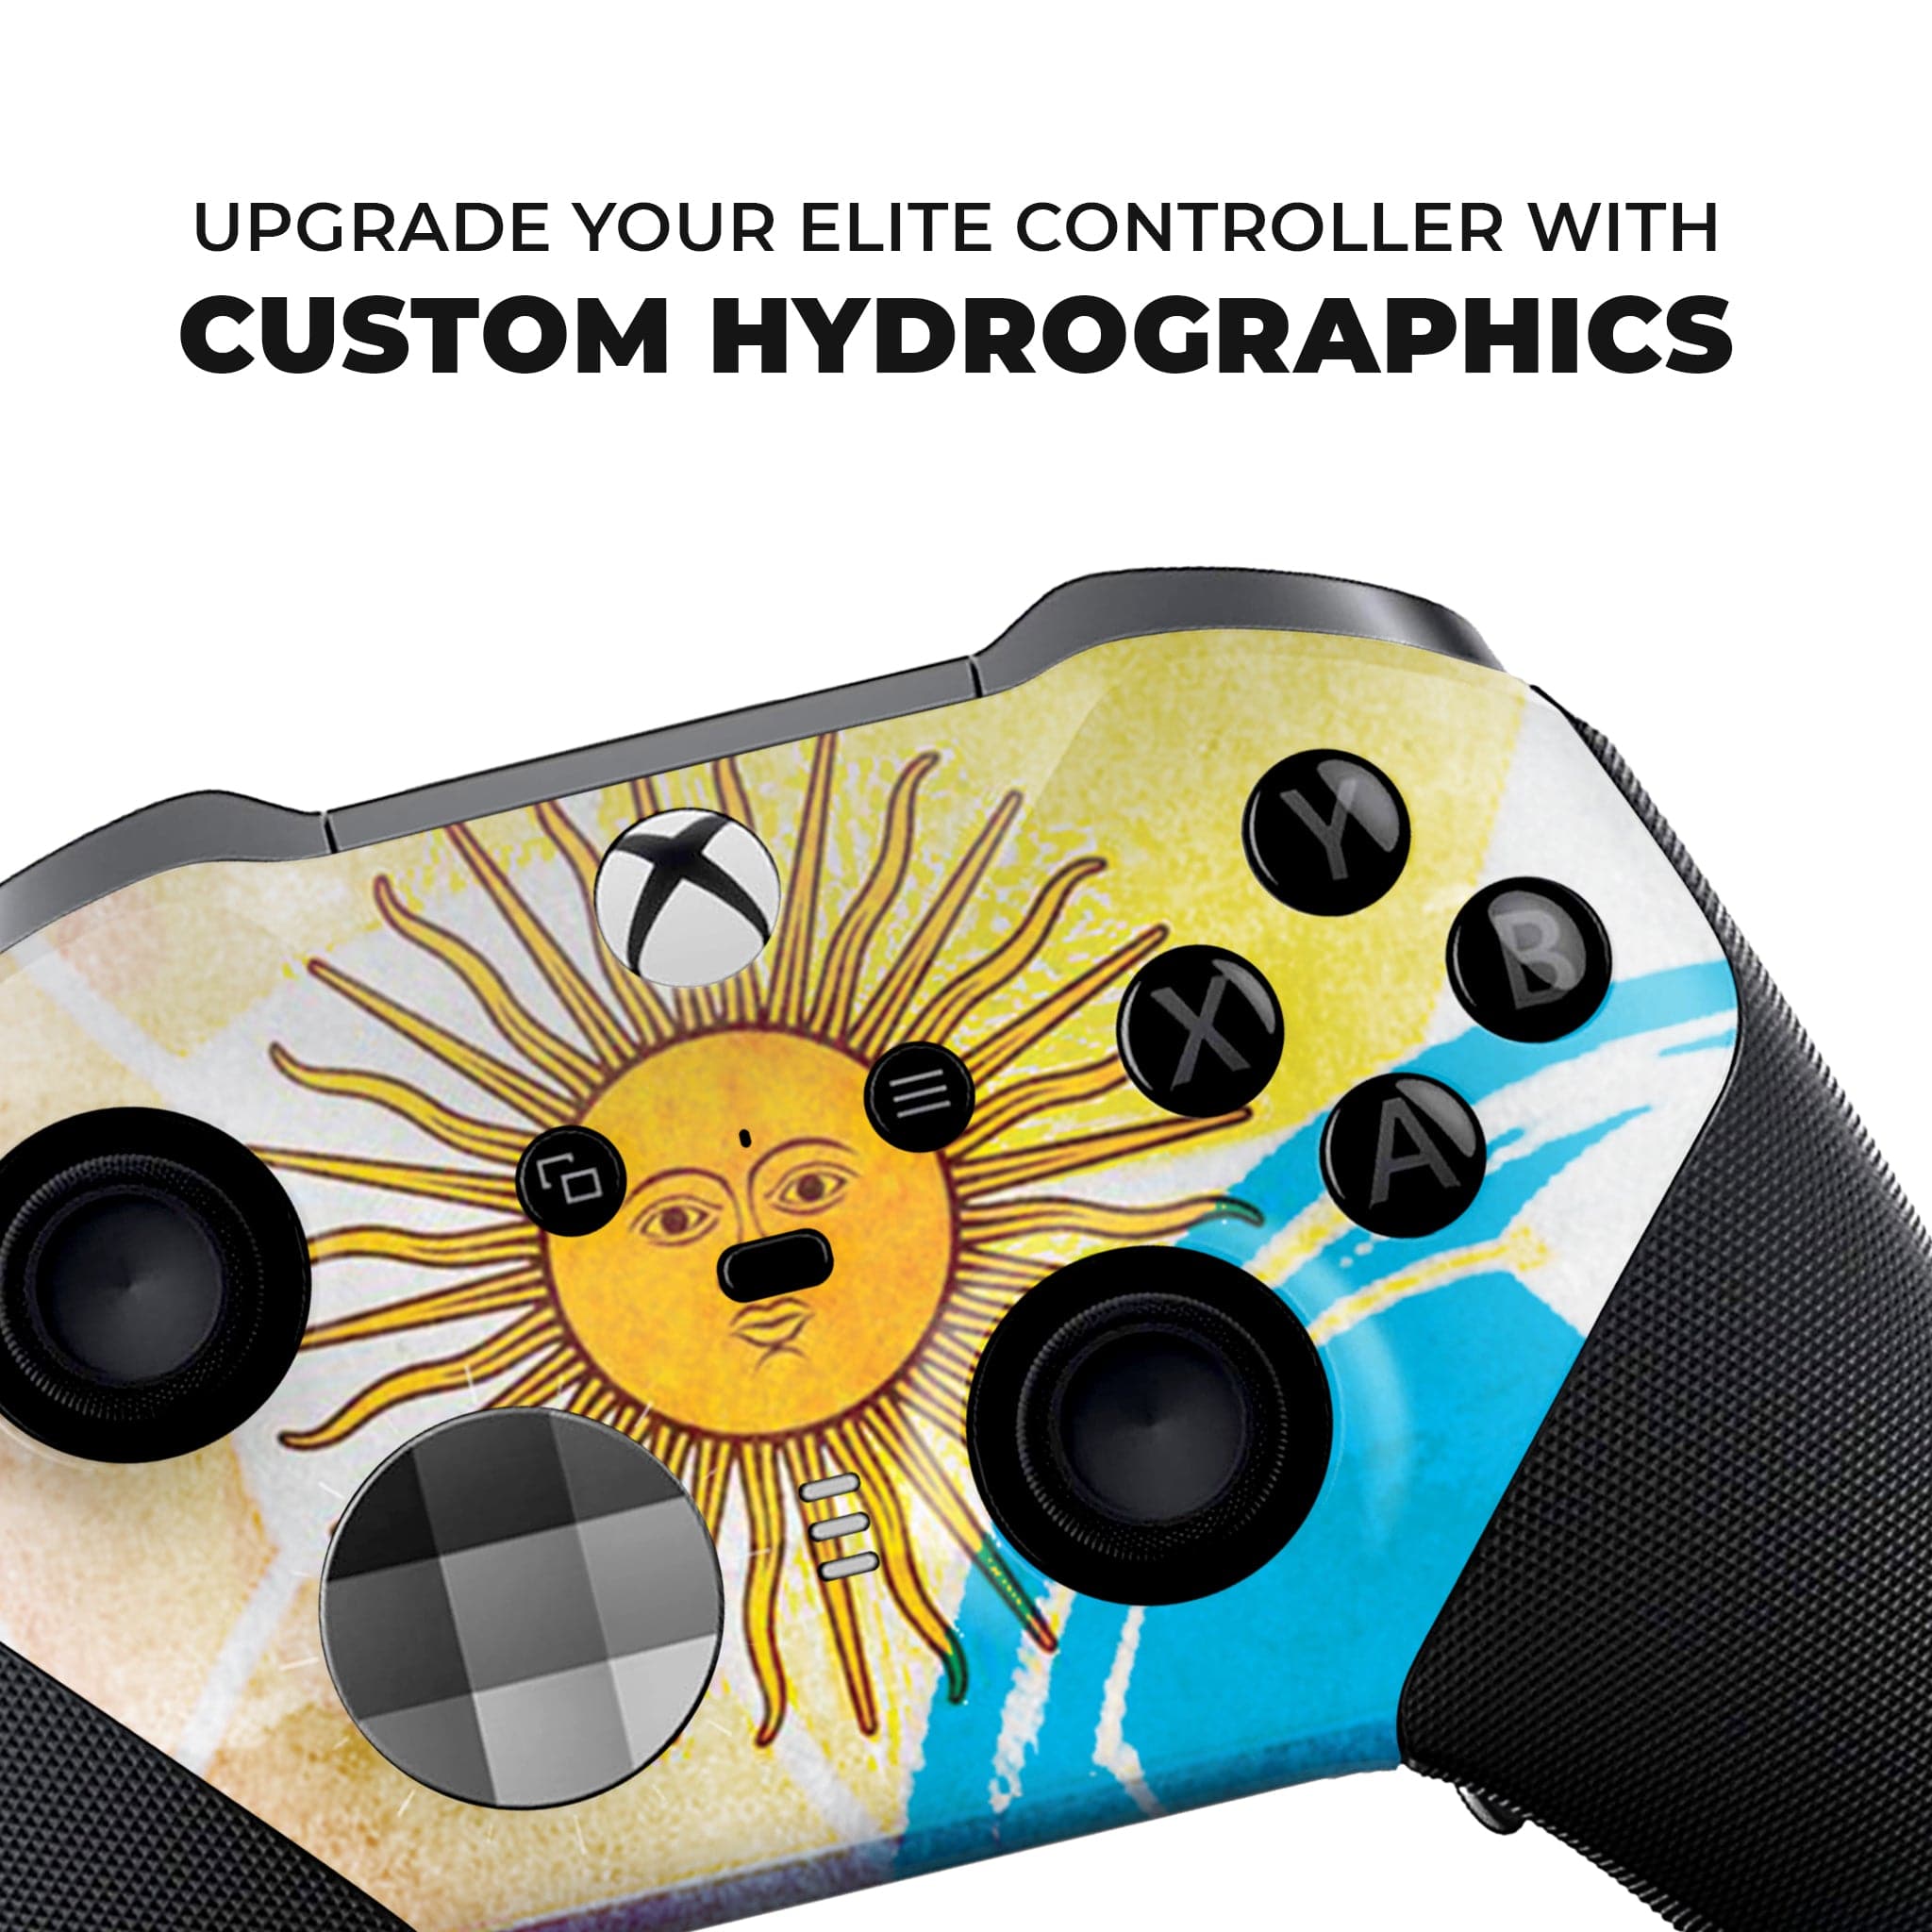 Argentina inspired Xbox Series X Controller